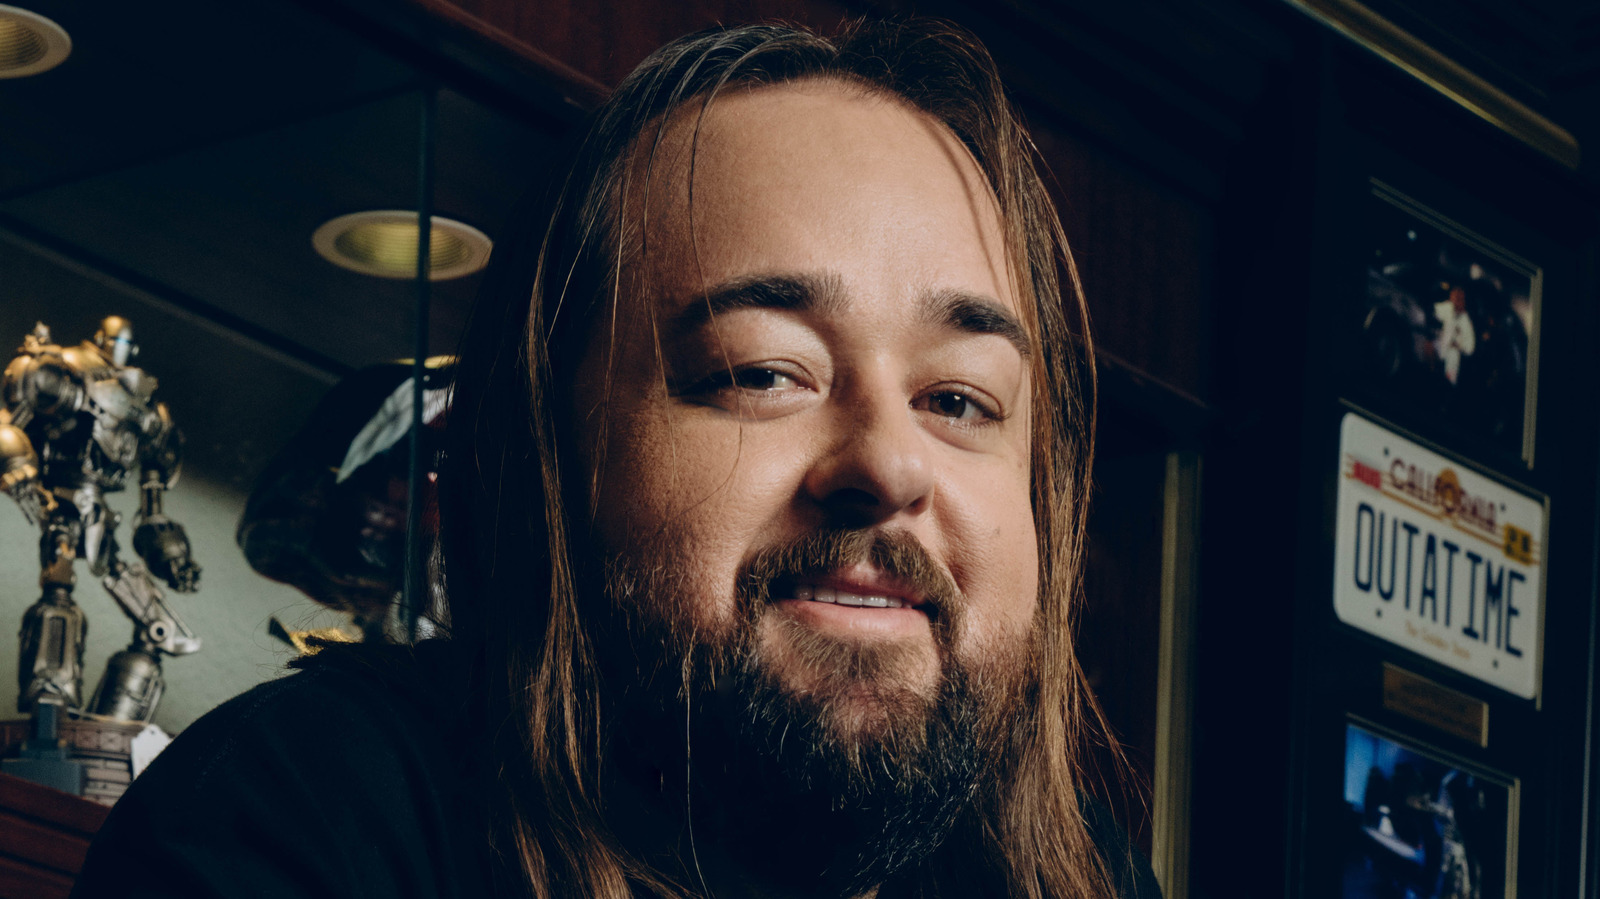 Pawn Stars Chumlee Talks New Season Answers Fan Questions And More Exclusive Interview